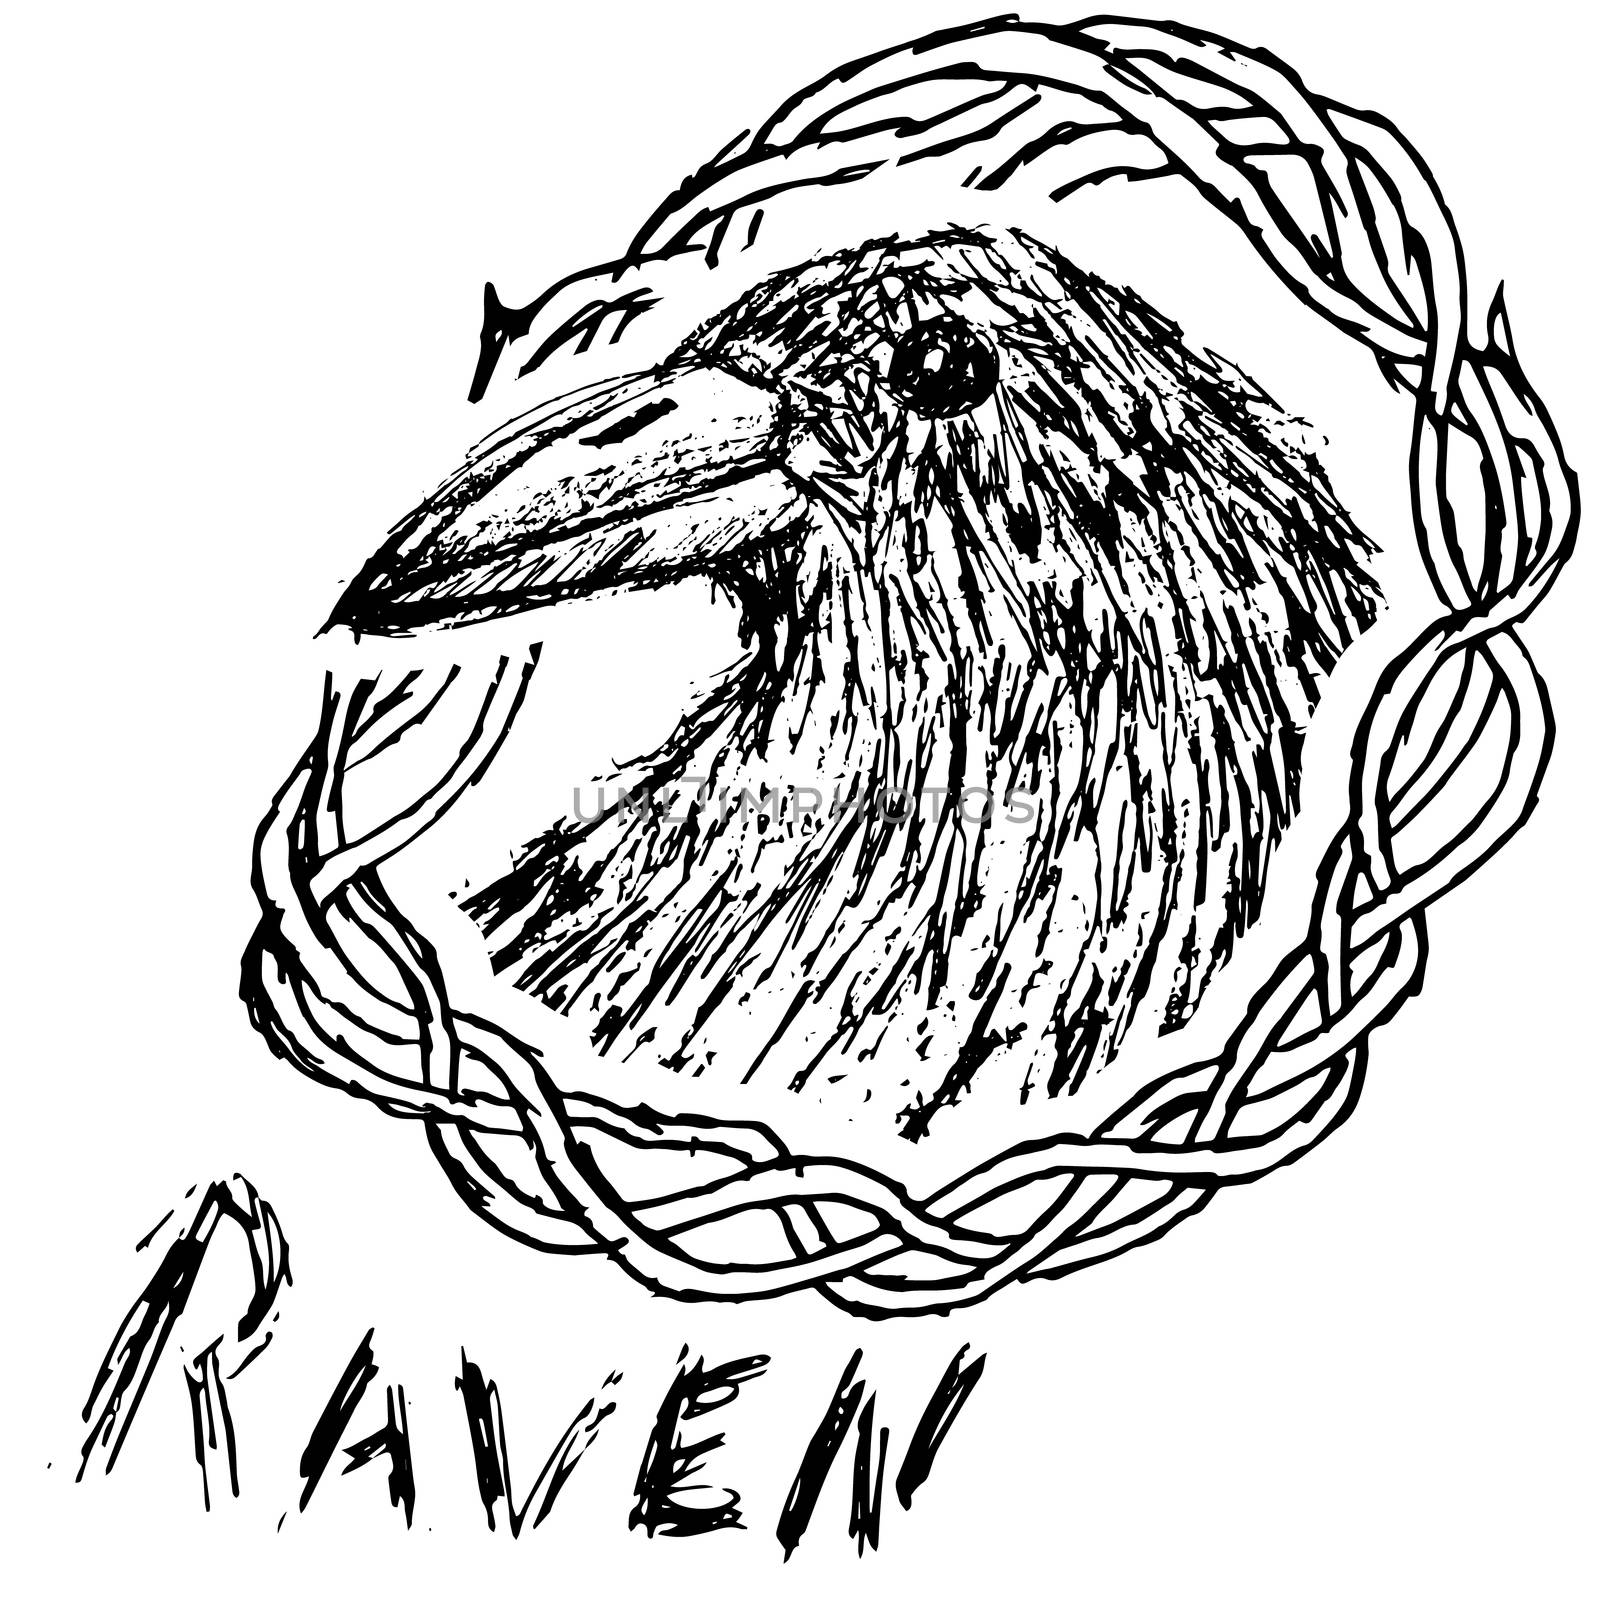 Crow raven handdrawn sketch in blackthorn  isolated on white.